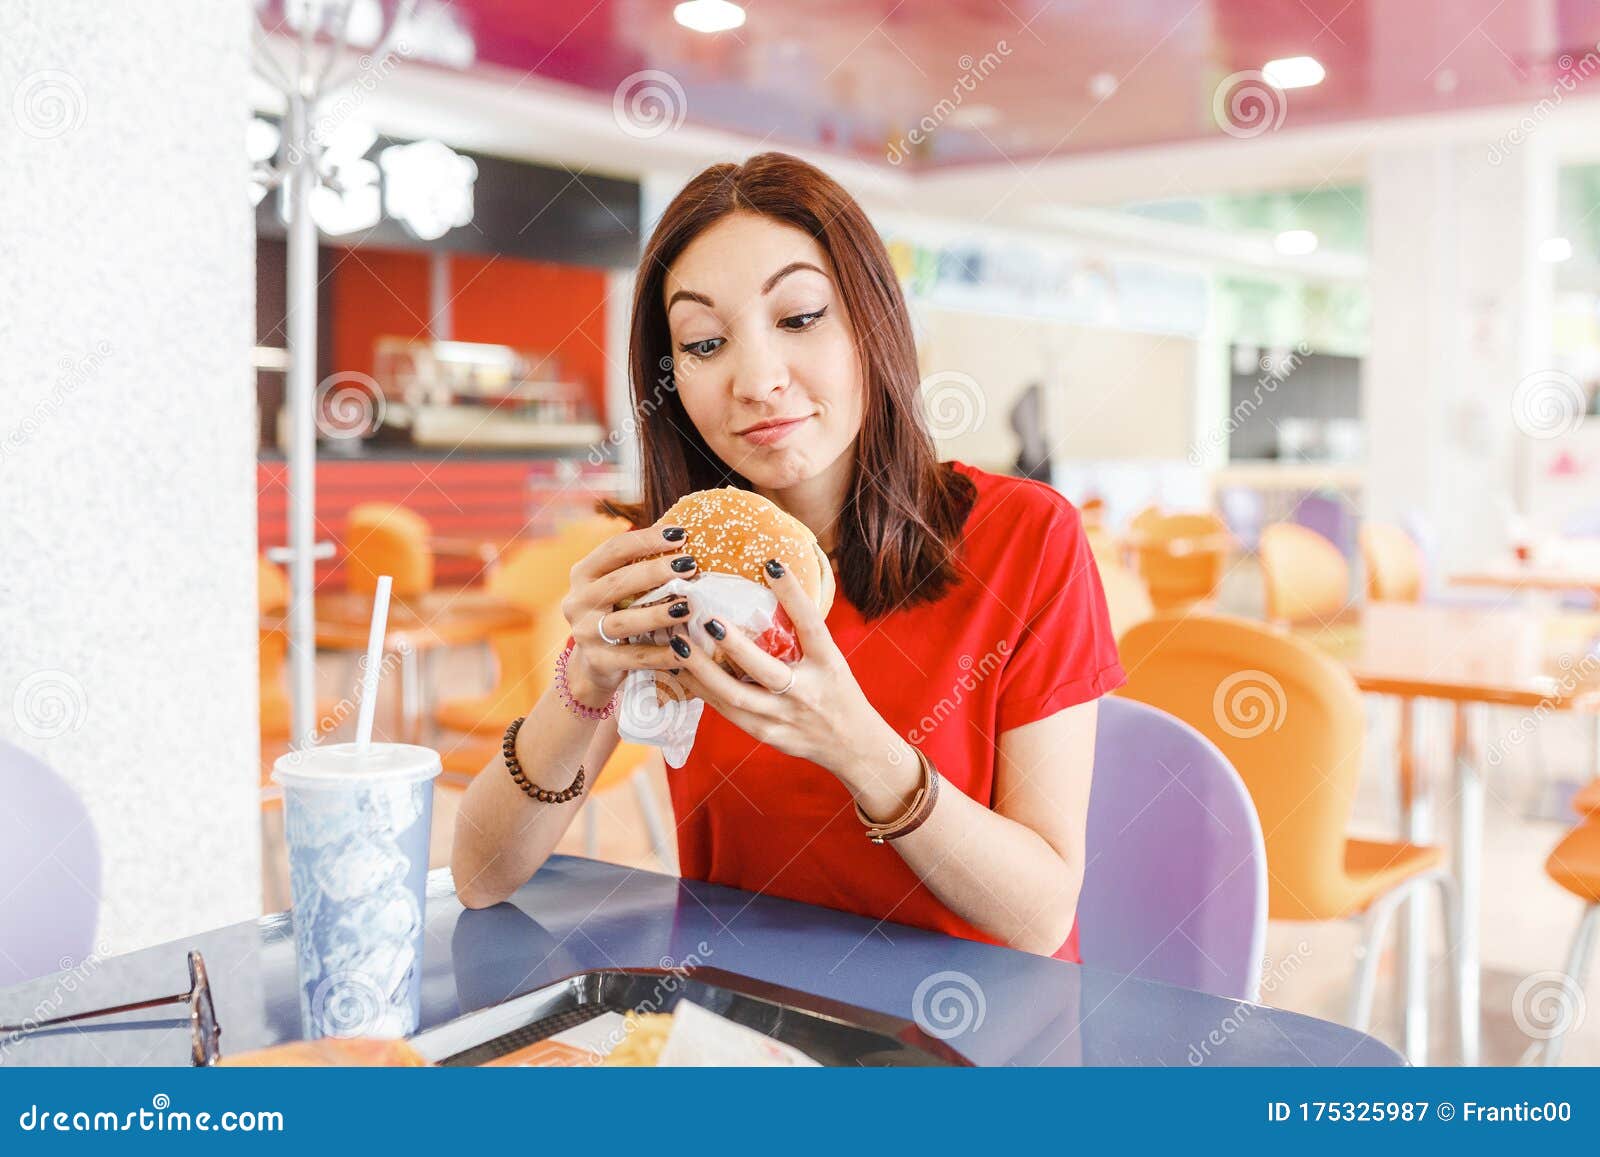 Healthy Woman Sitting In Indoors Food Court And Eating